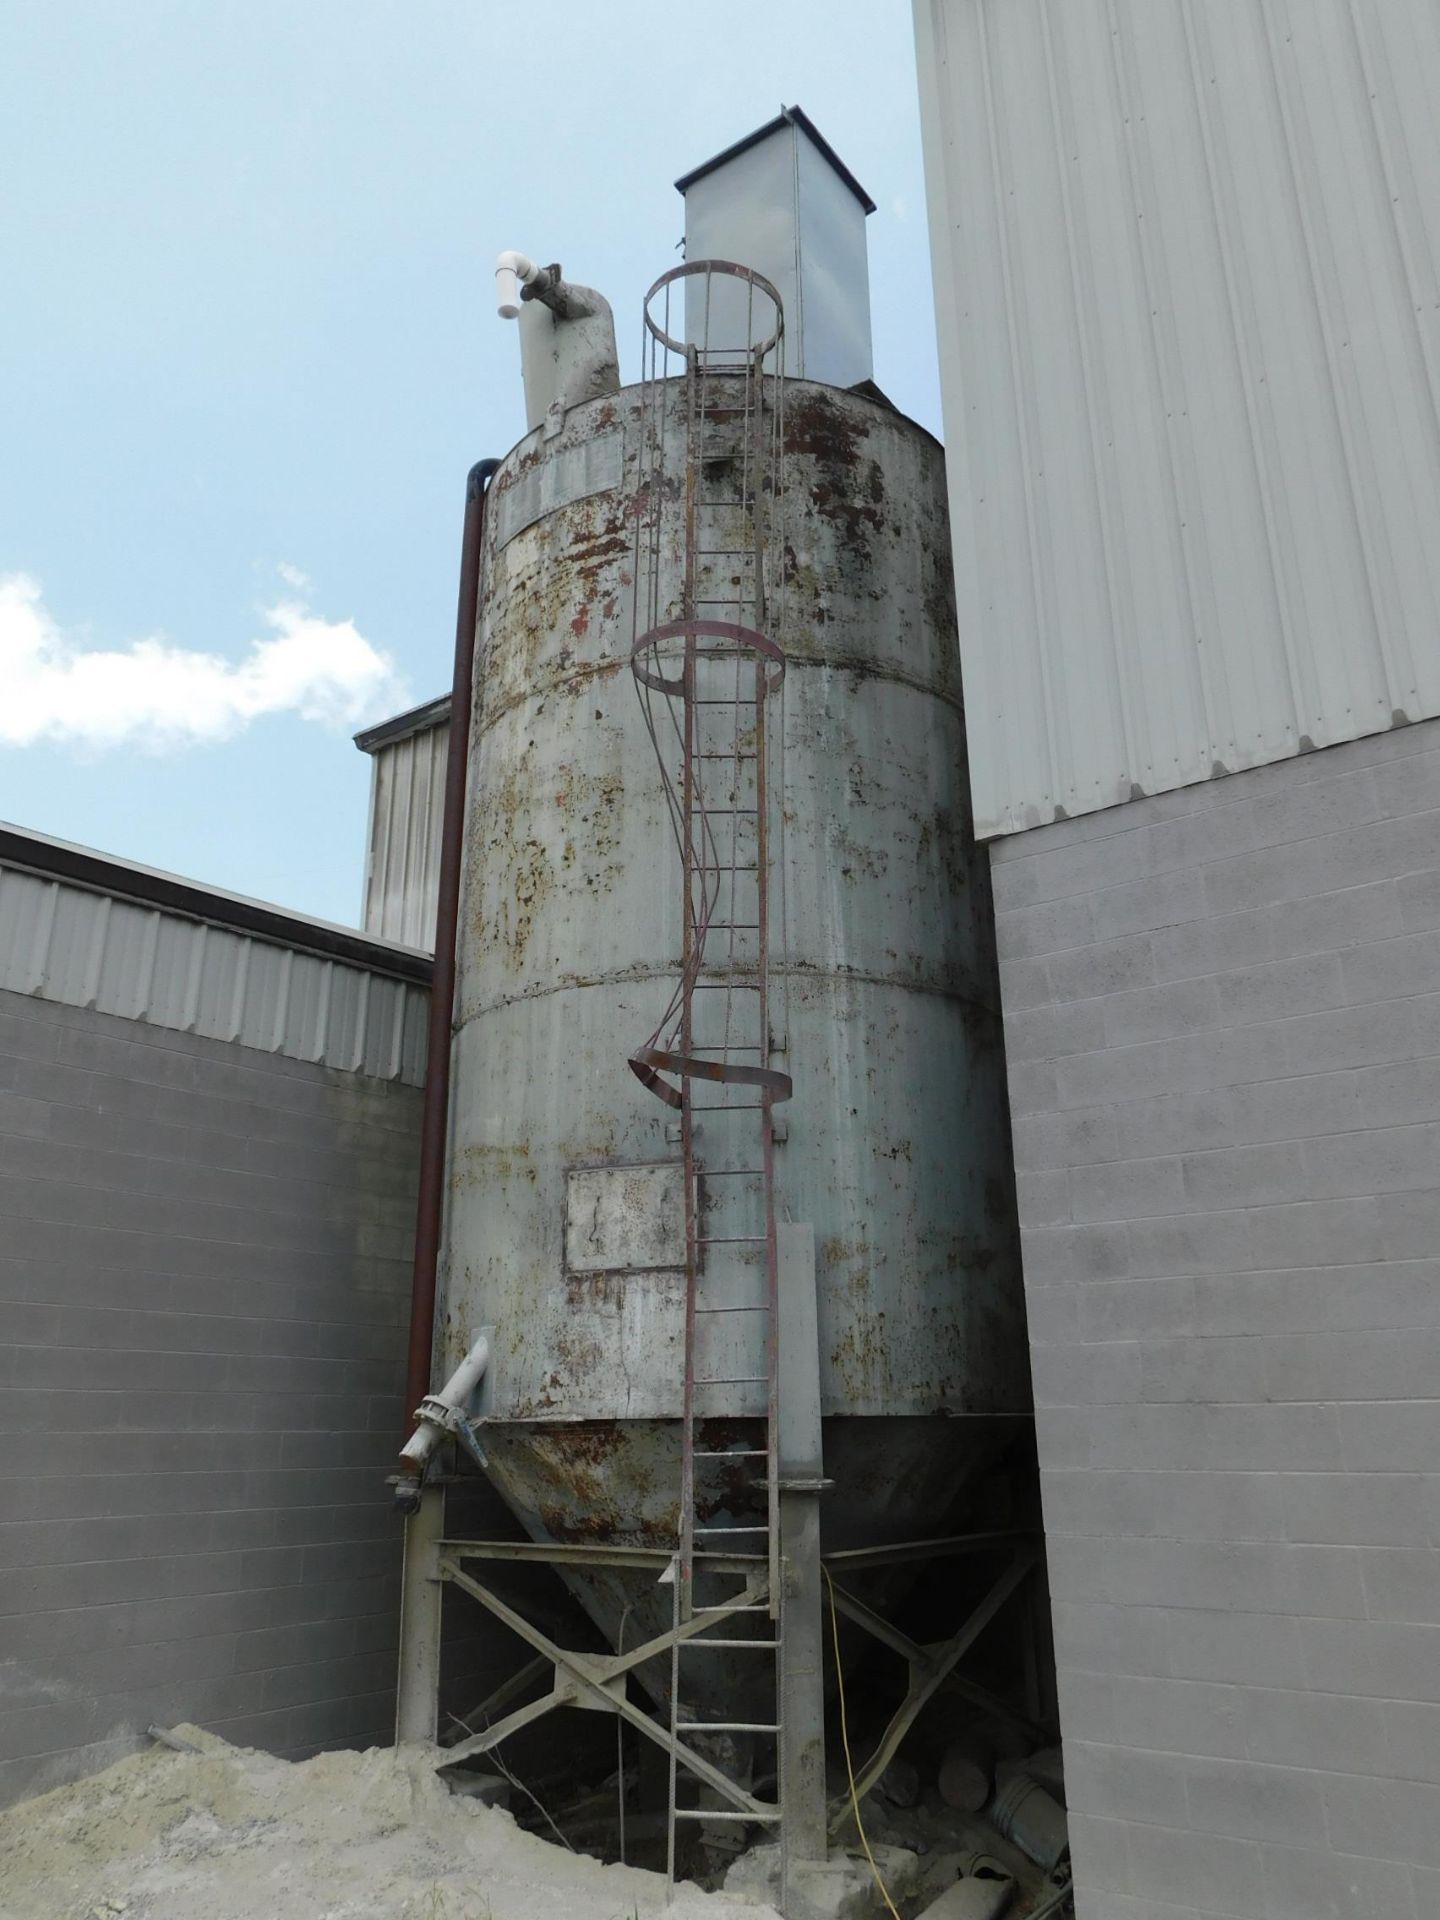 Fielding 100-Ton Hydraulic Press with Fielding Concrete Mixer, Bins, Conveyors, and Silo - Image 27 of 27